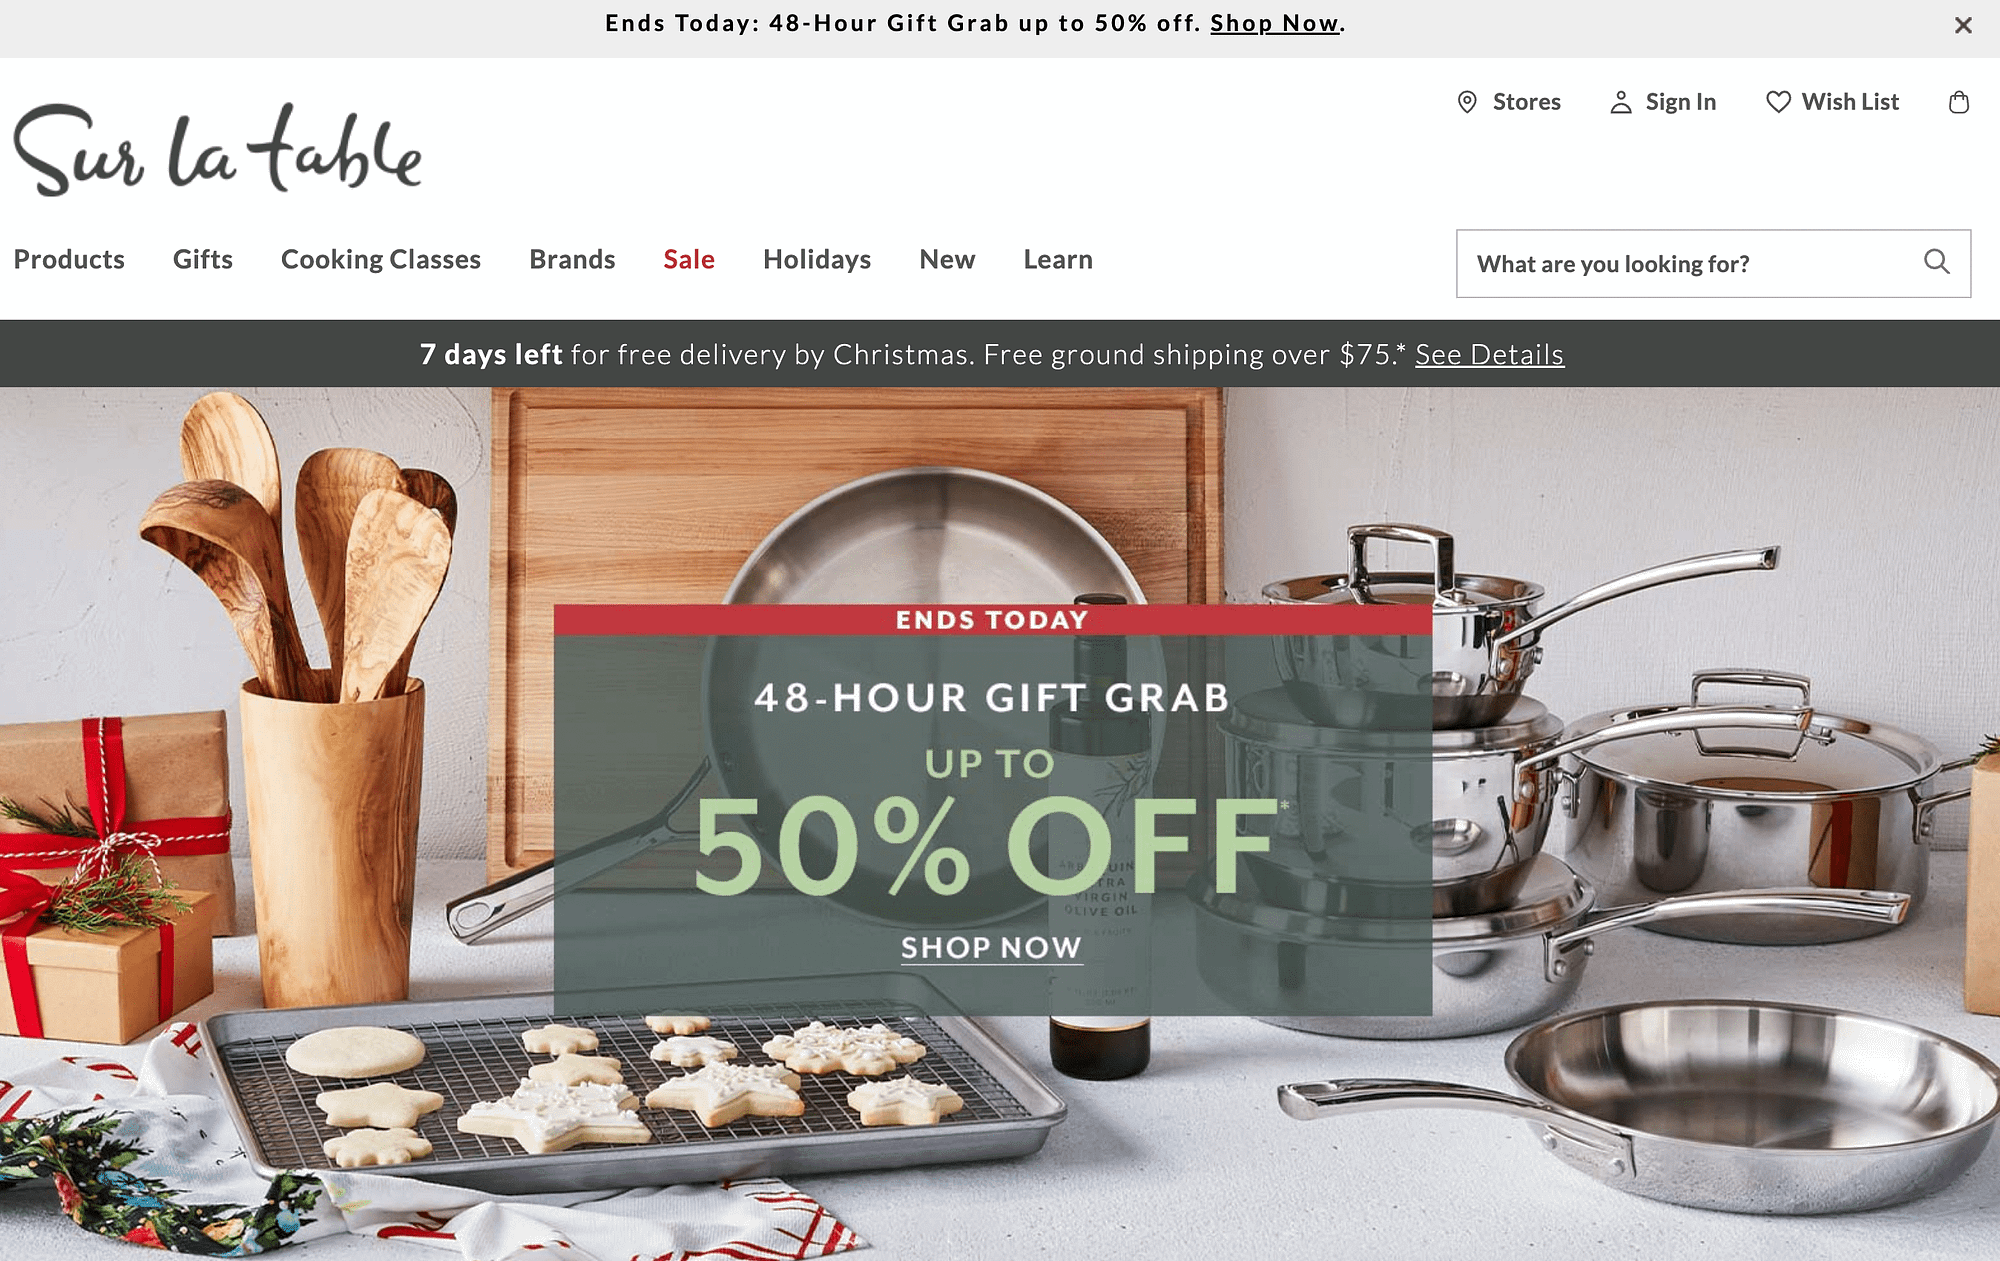 A 48-hour gift grab in an ecommerce store - a good example of Christmas promotion ideas.